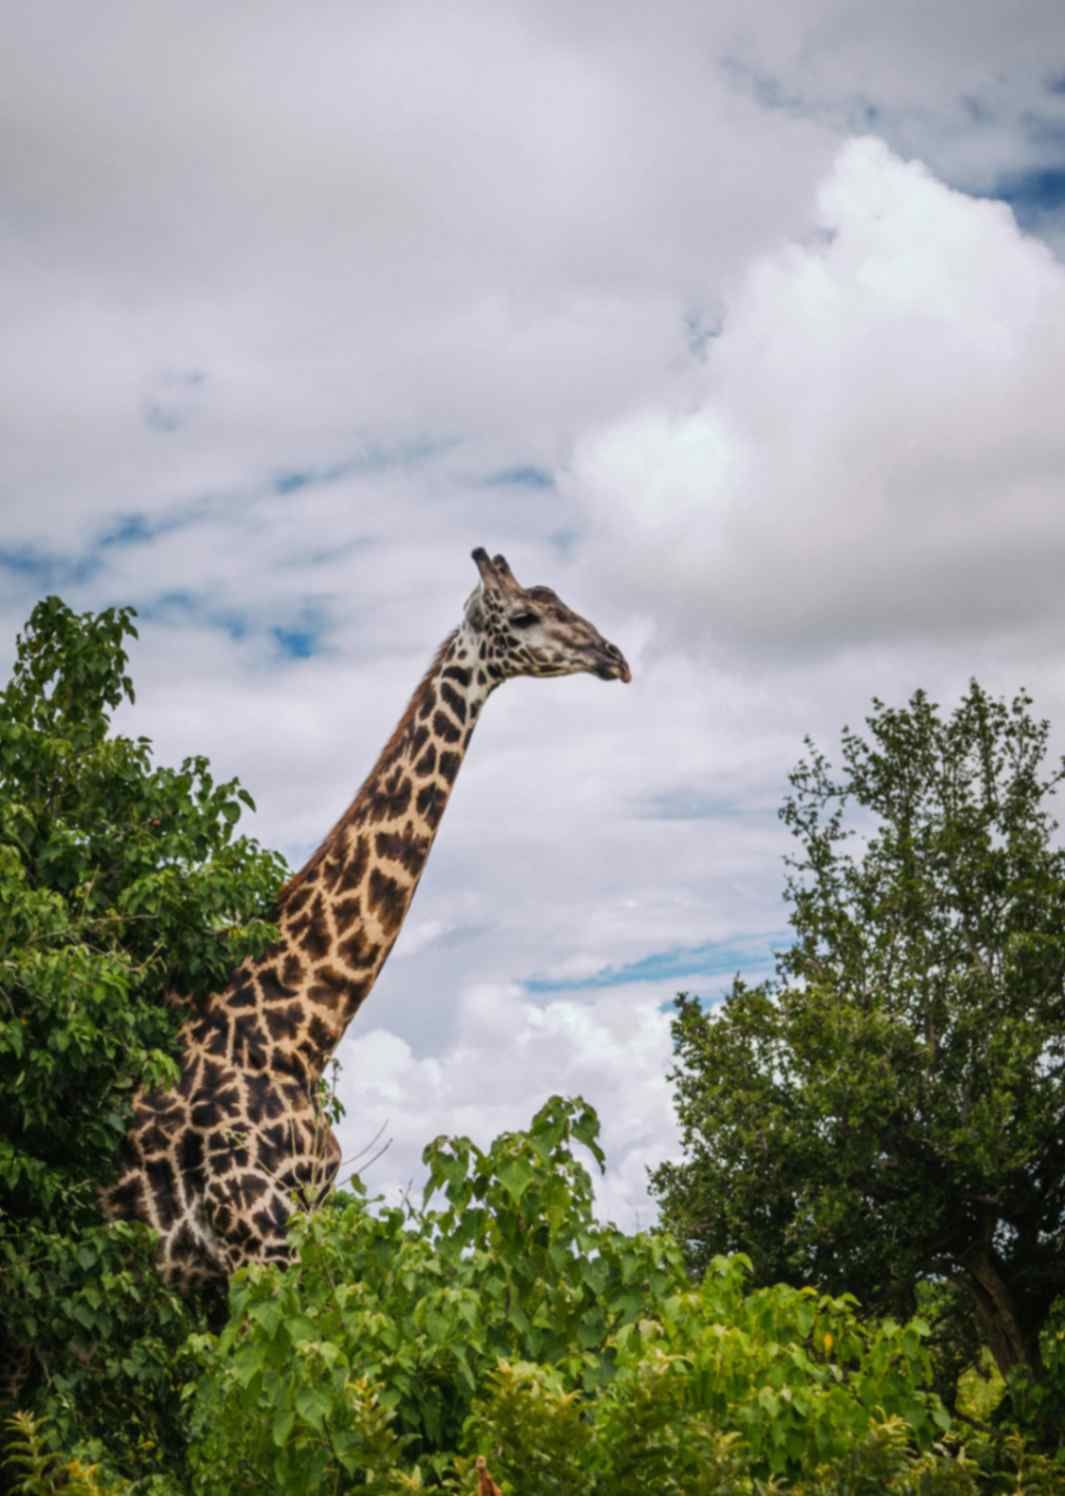 Giraffes are often spotted behind trees, the only animal that appears more frequently at chobe national park